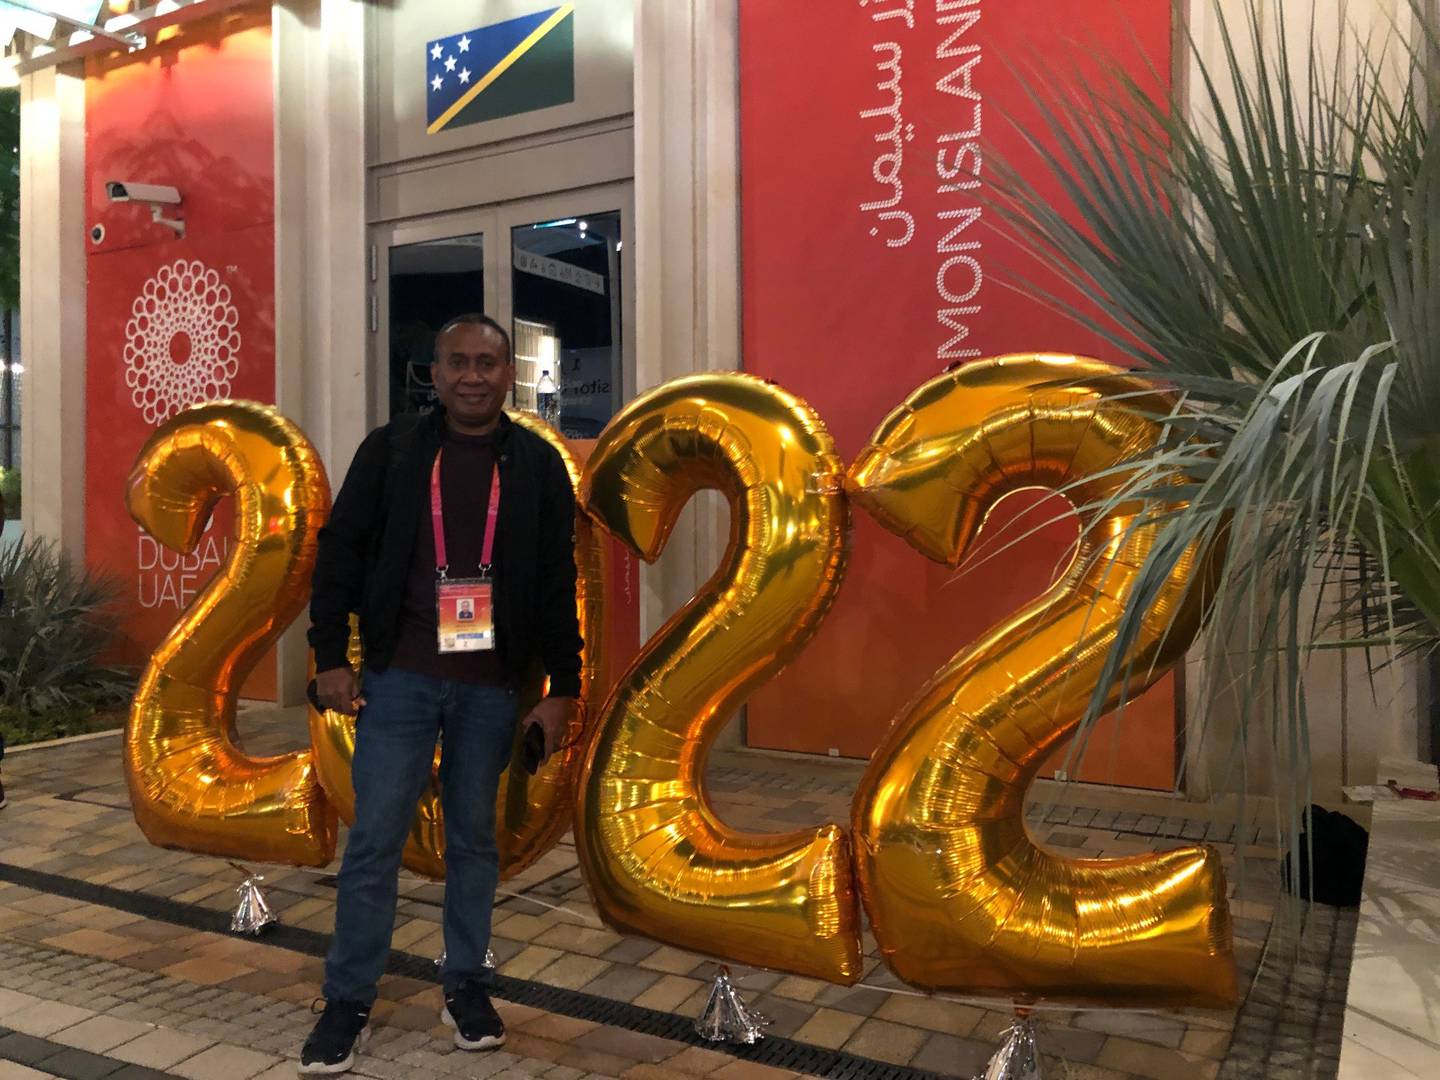 Dennis Marita from the Solomon Islands, one of the first nations to celebrate 2022 at 5pm in Dubai. Nicholas Webster / The National